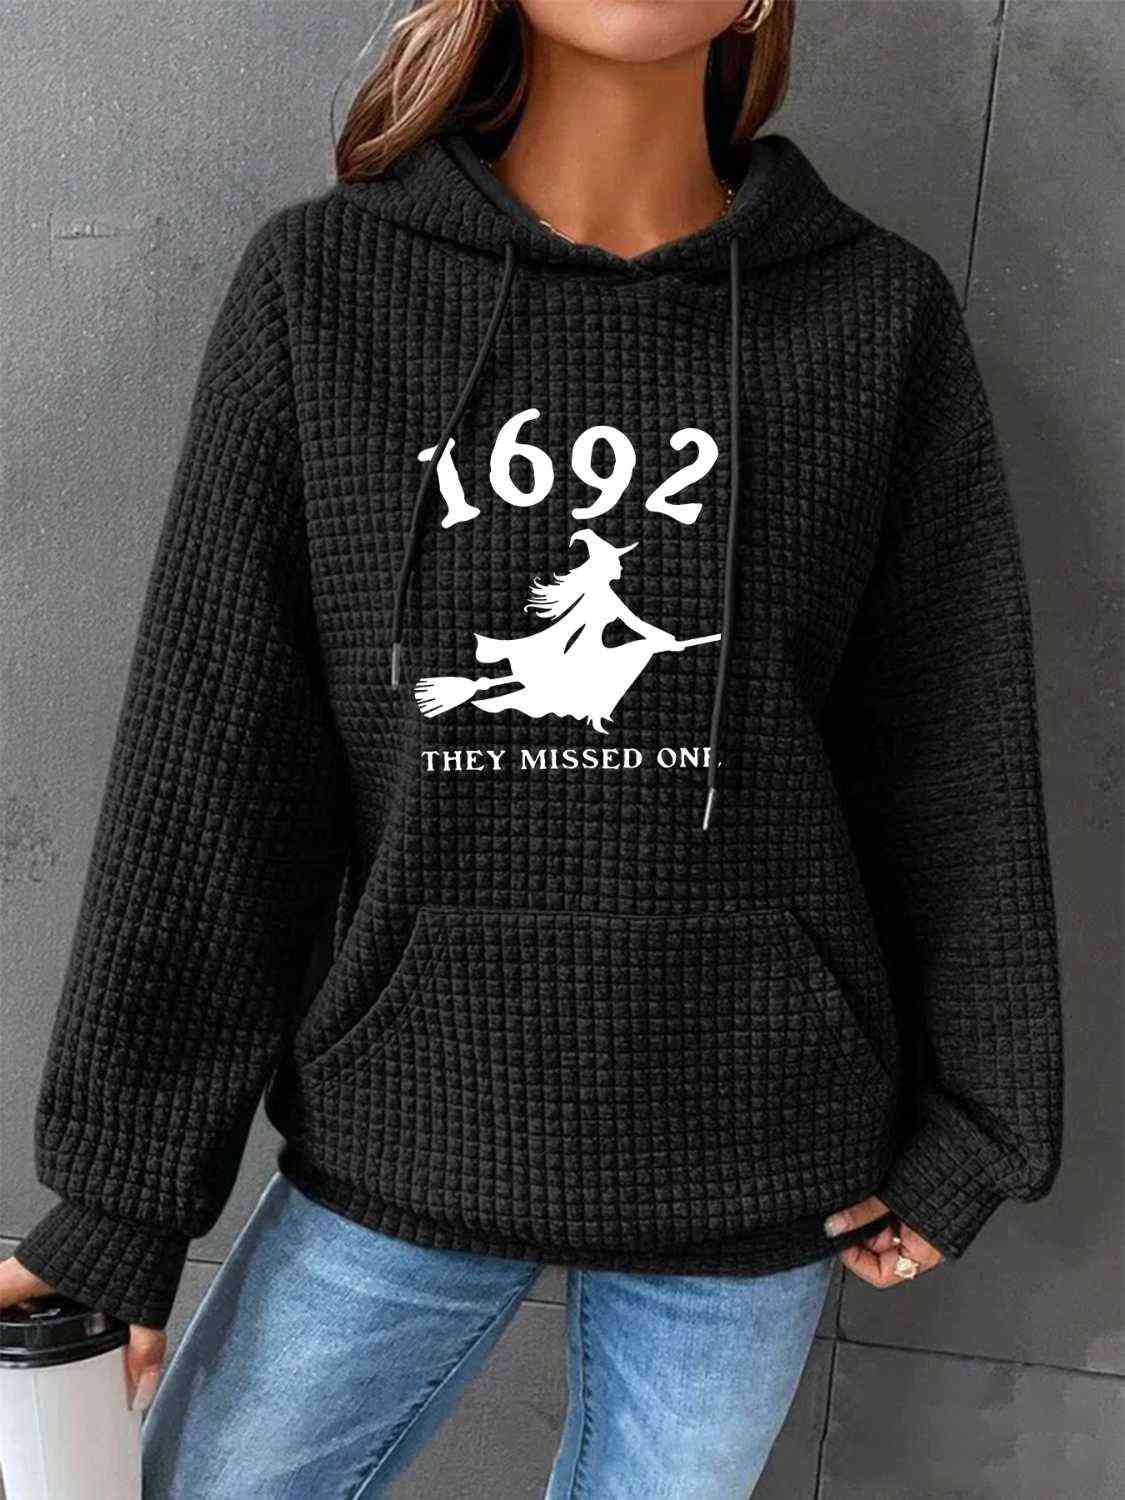 1962 THEY MISSED ONE Graphic Hoodie with Front Pocket BLUE ZONE PLANET